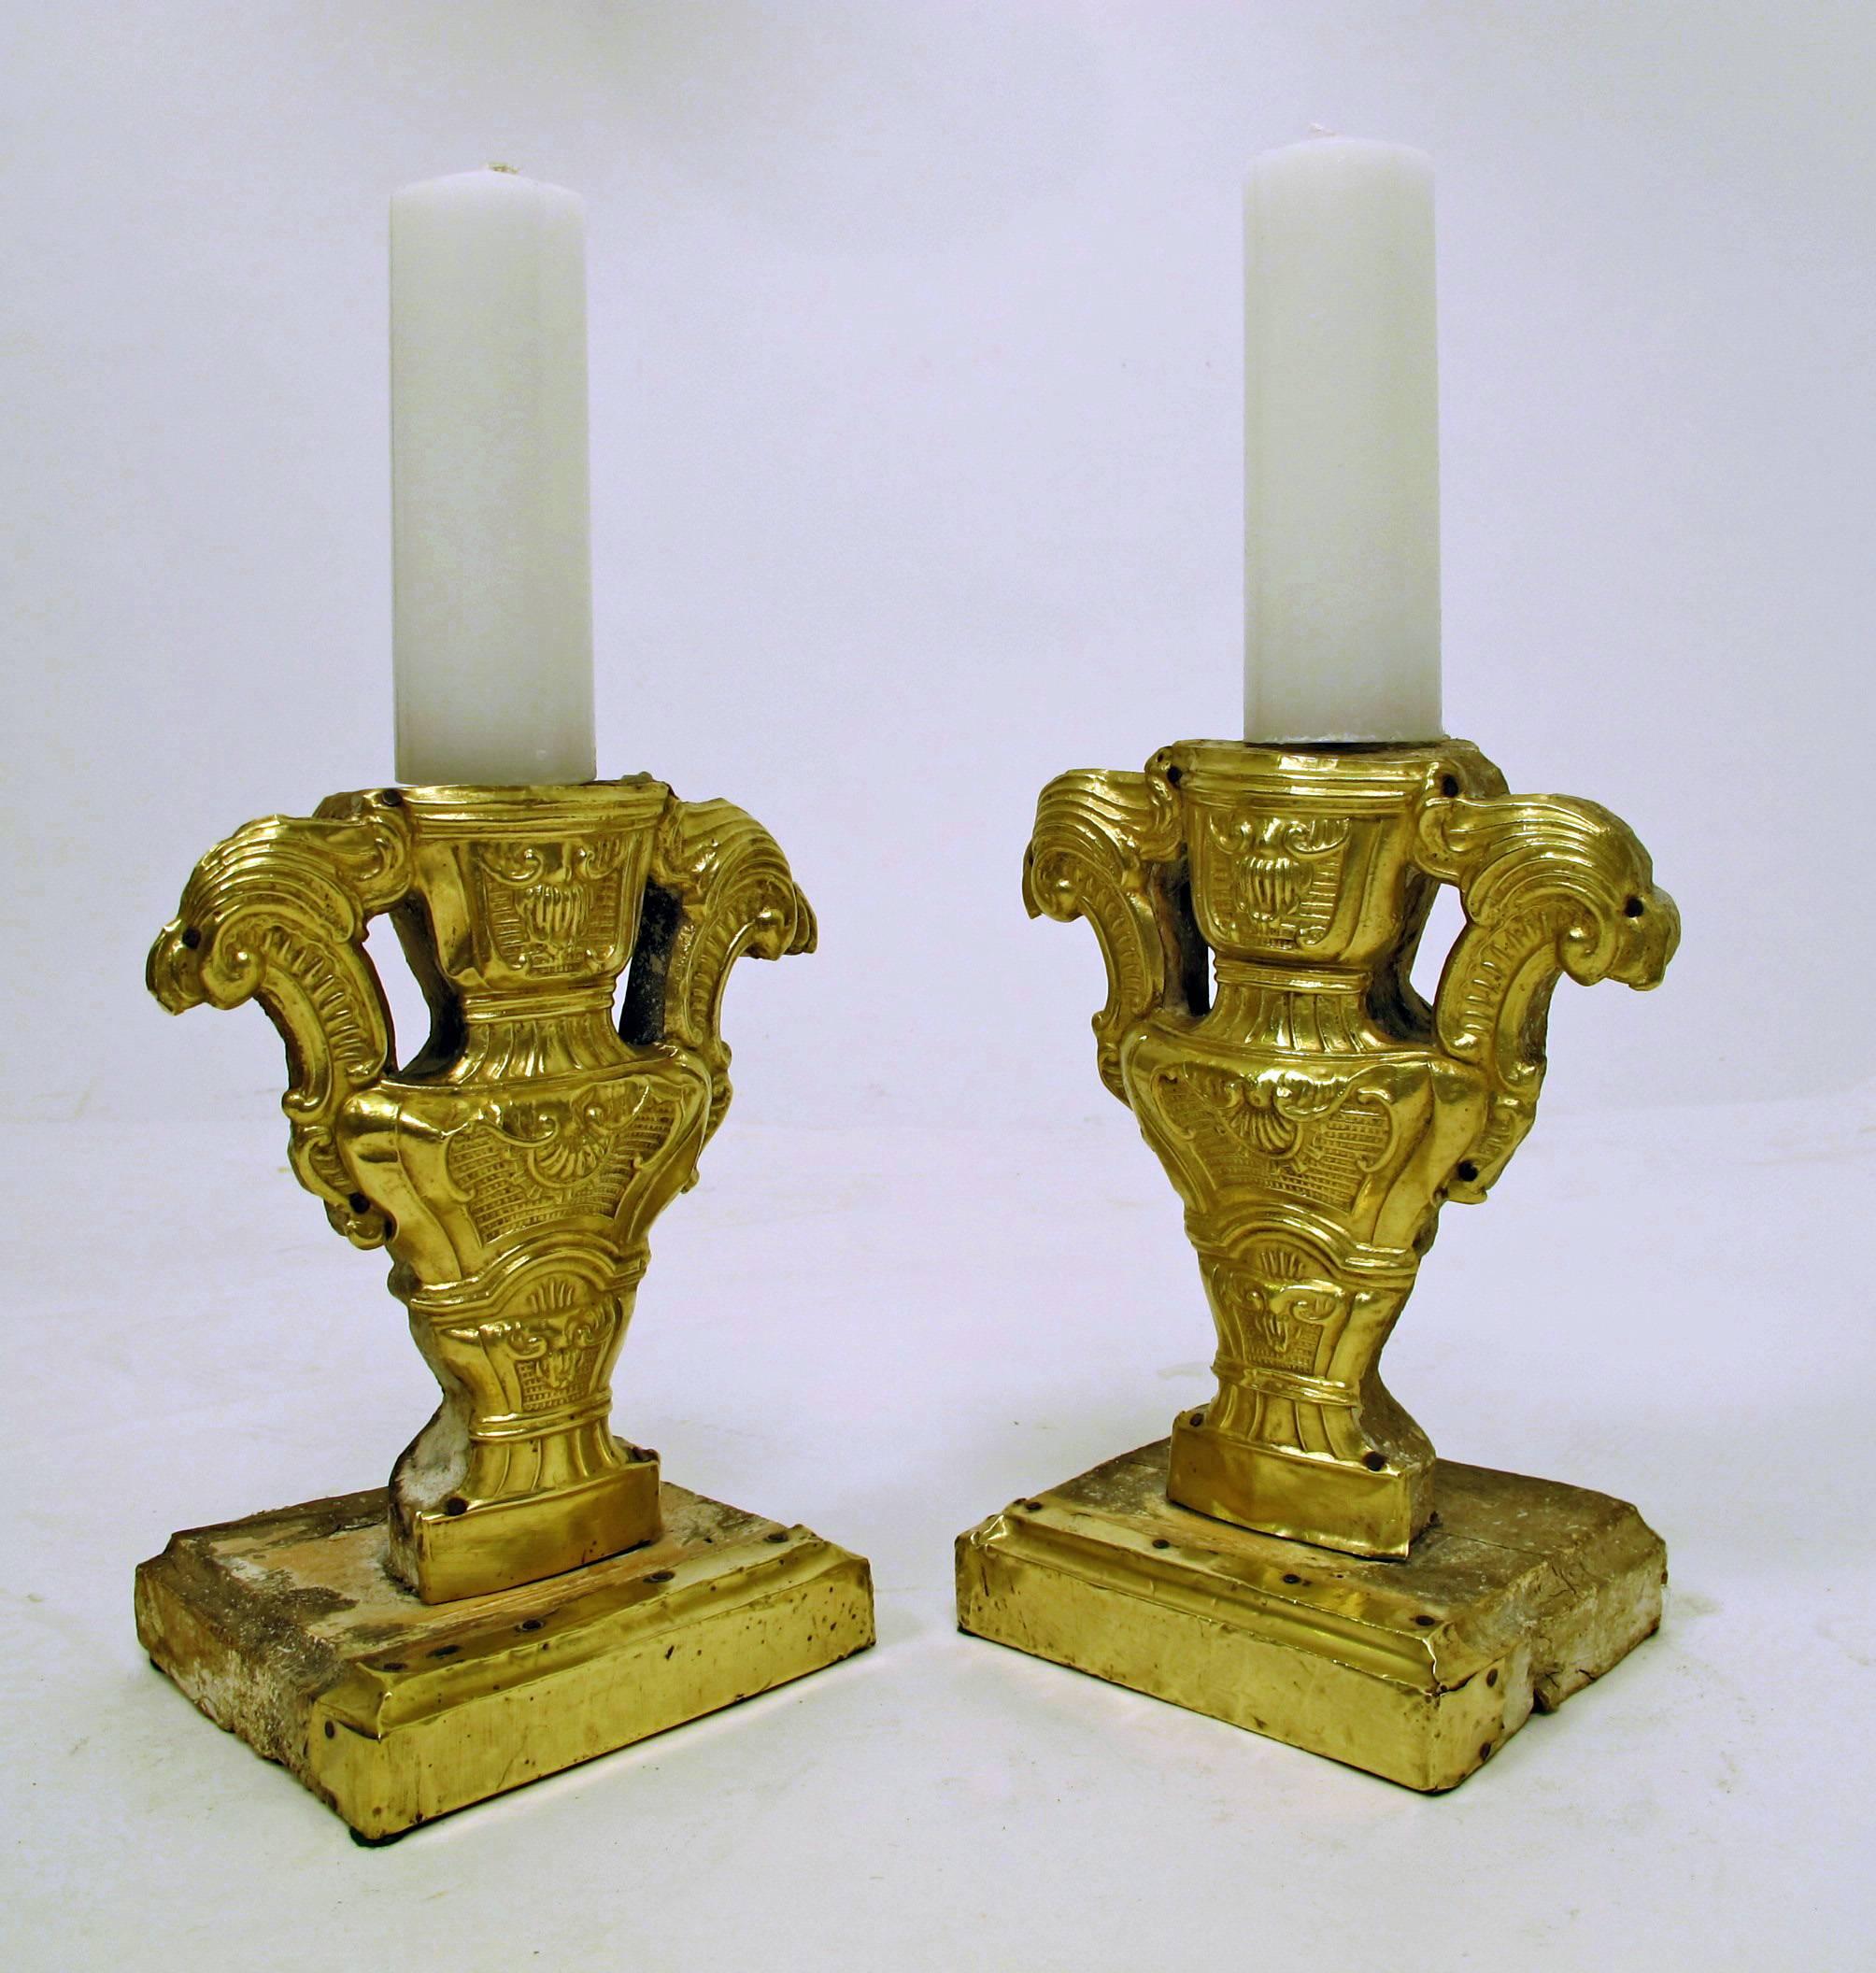 Pair of 18th Century Italian Wood and Brass Pricket Candleholders For Sale 2